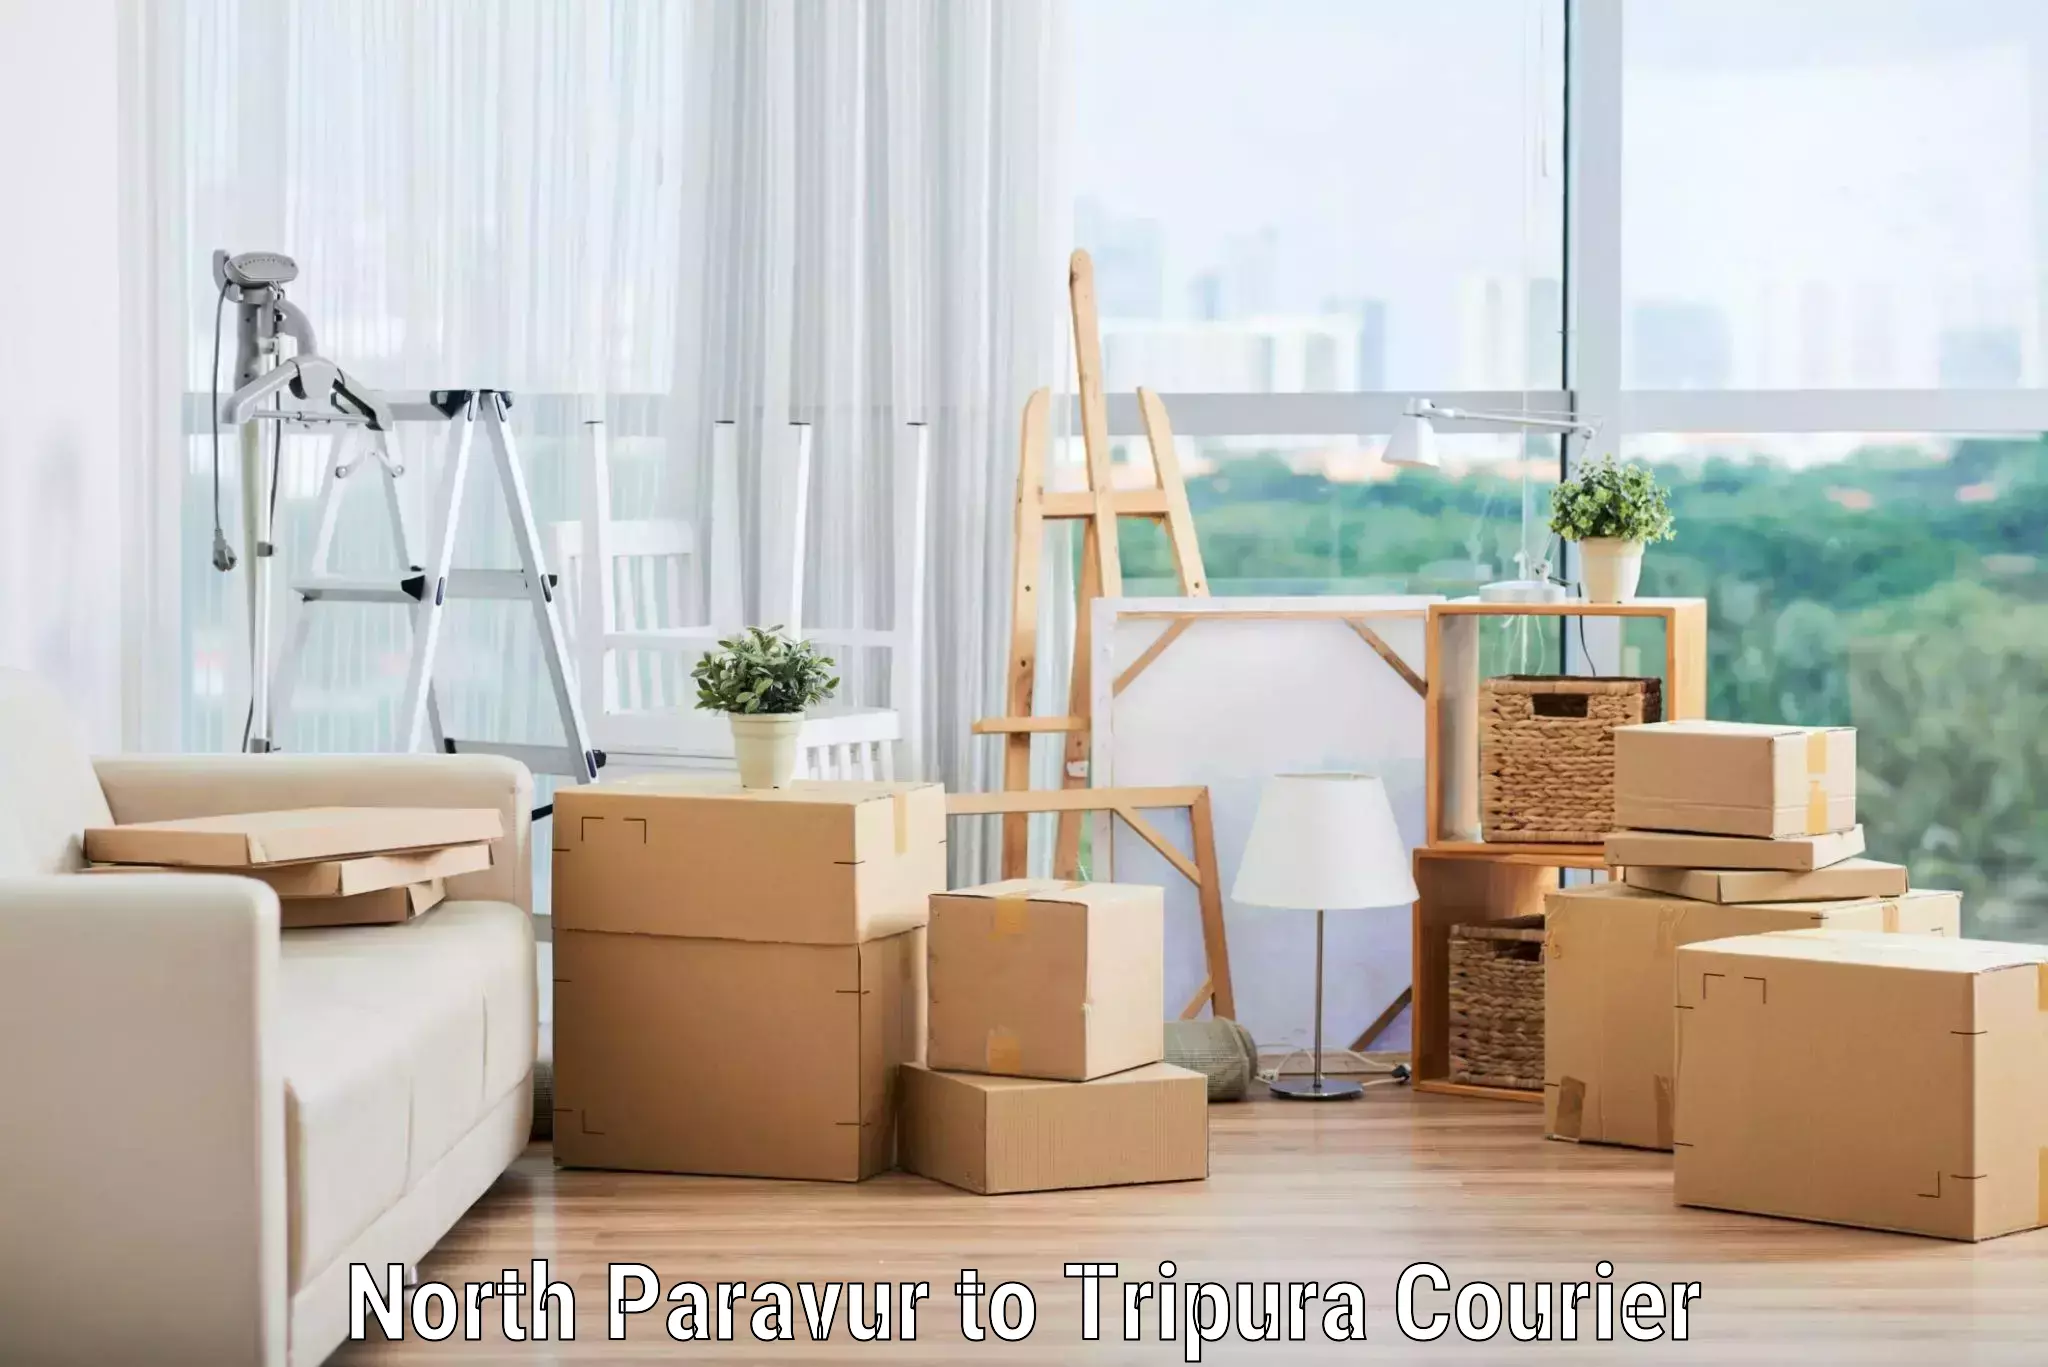 Trusted moving company North Paravur to Tripura